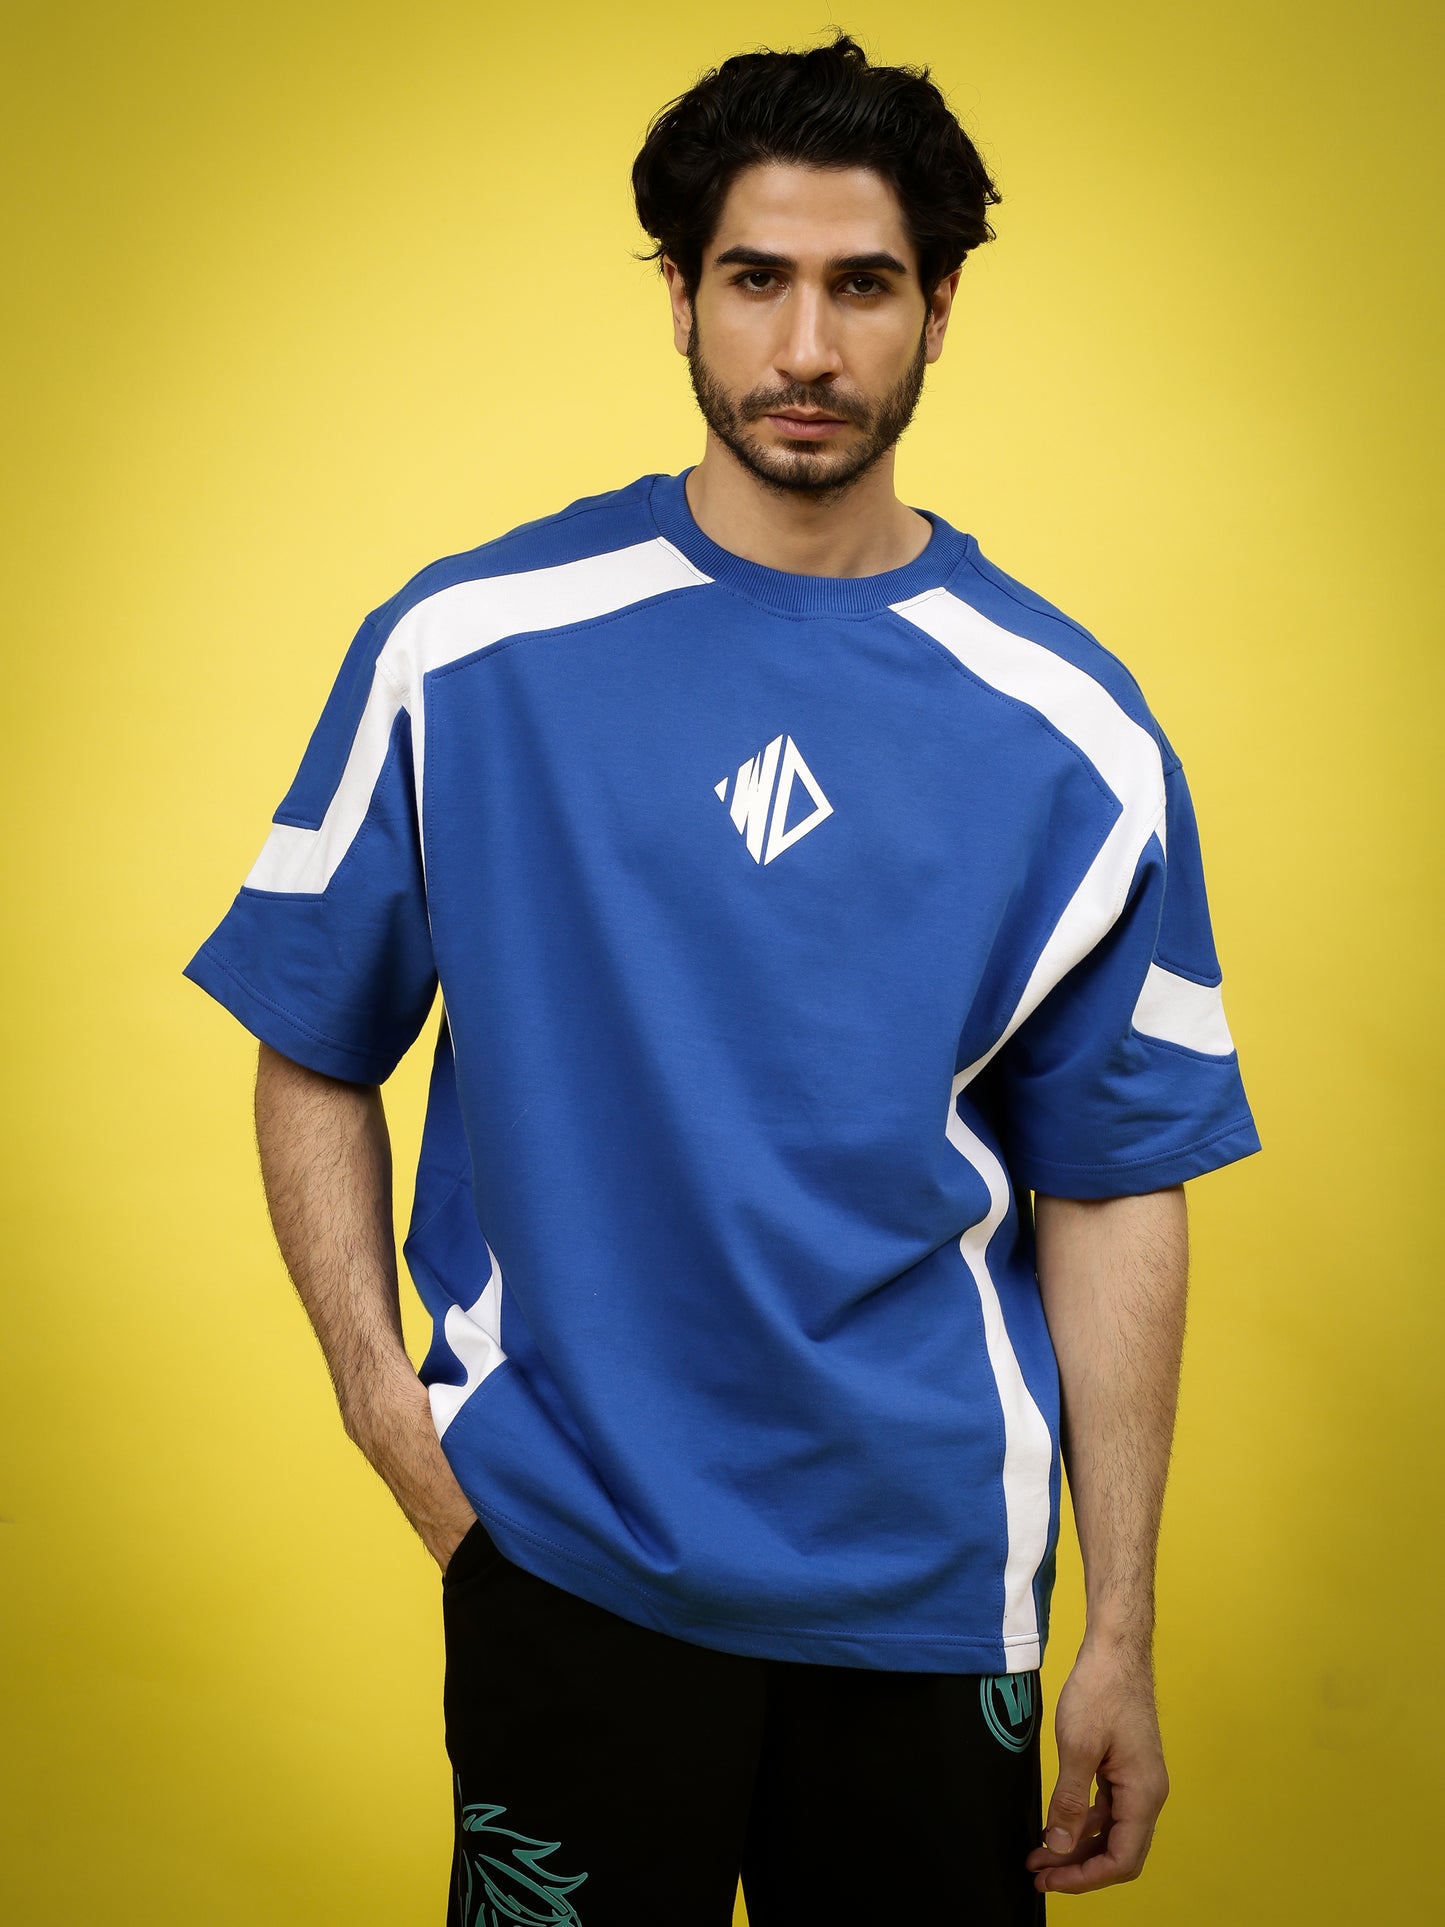 Rugby Over-Sized T-Shirt (Royal Blue-White)